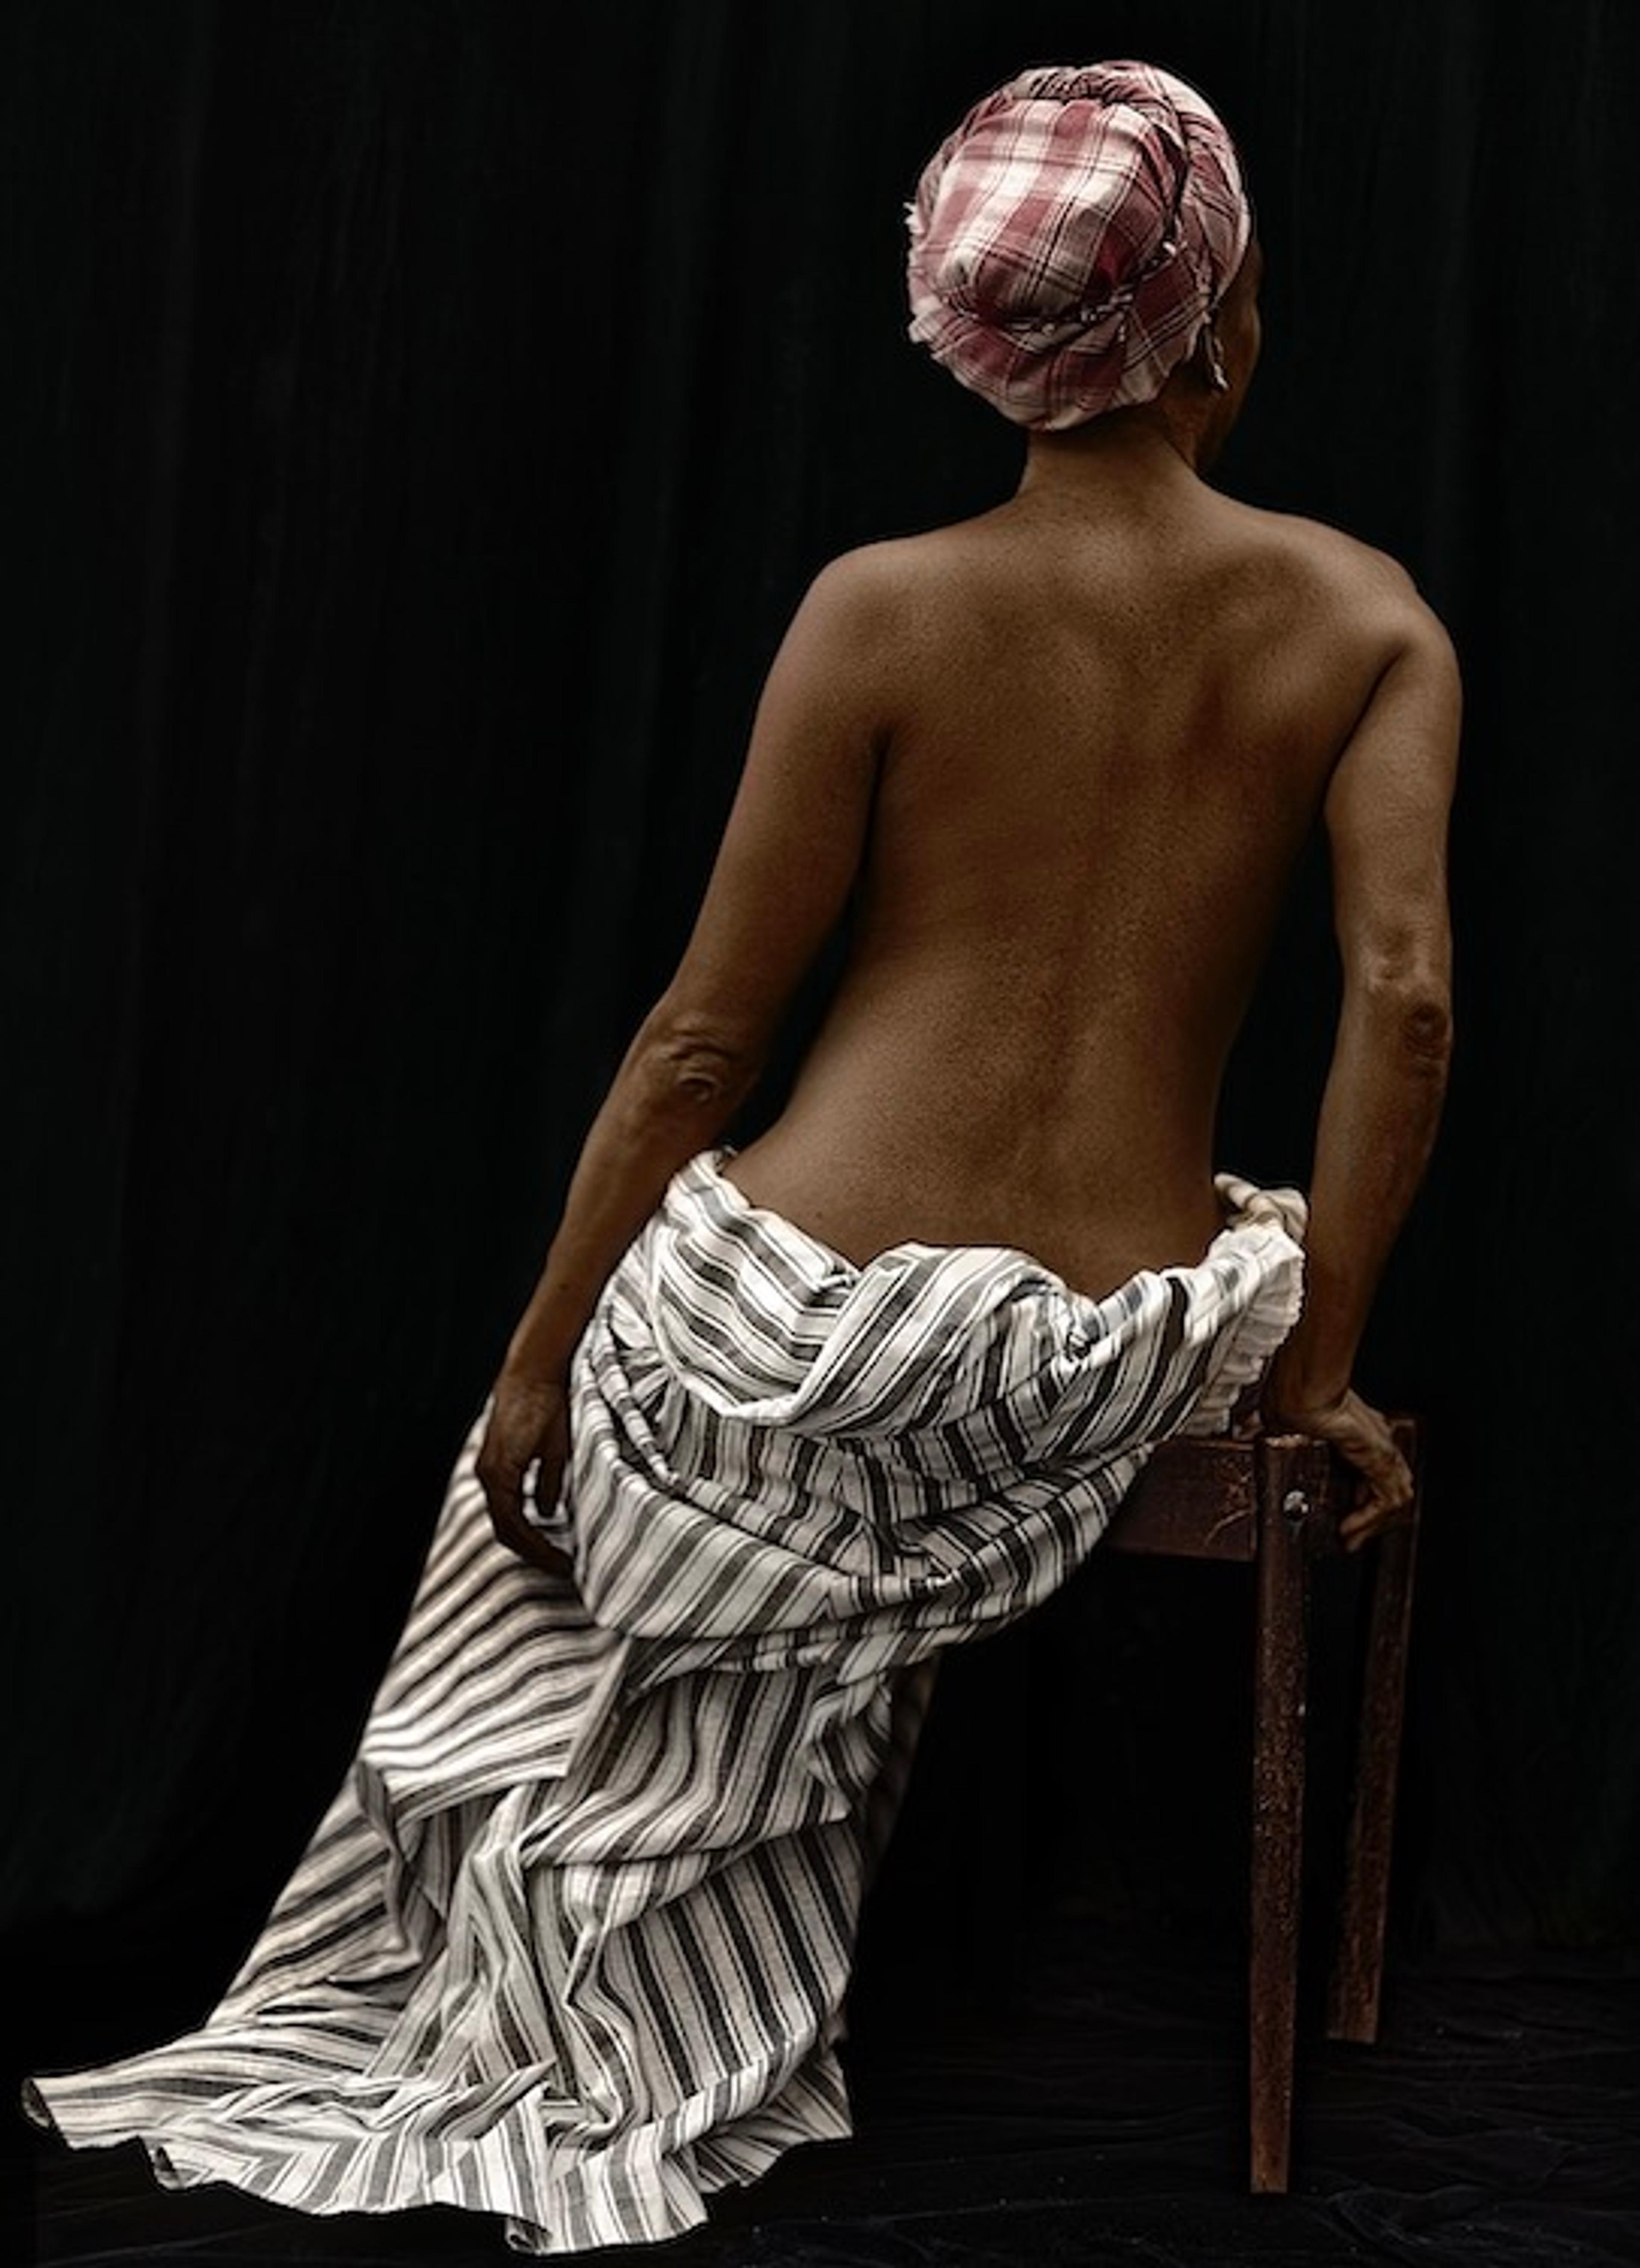 A portrait taken from the back of an unclothed woman wearing a head covering